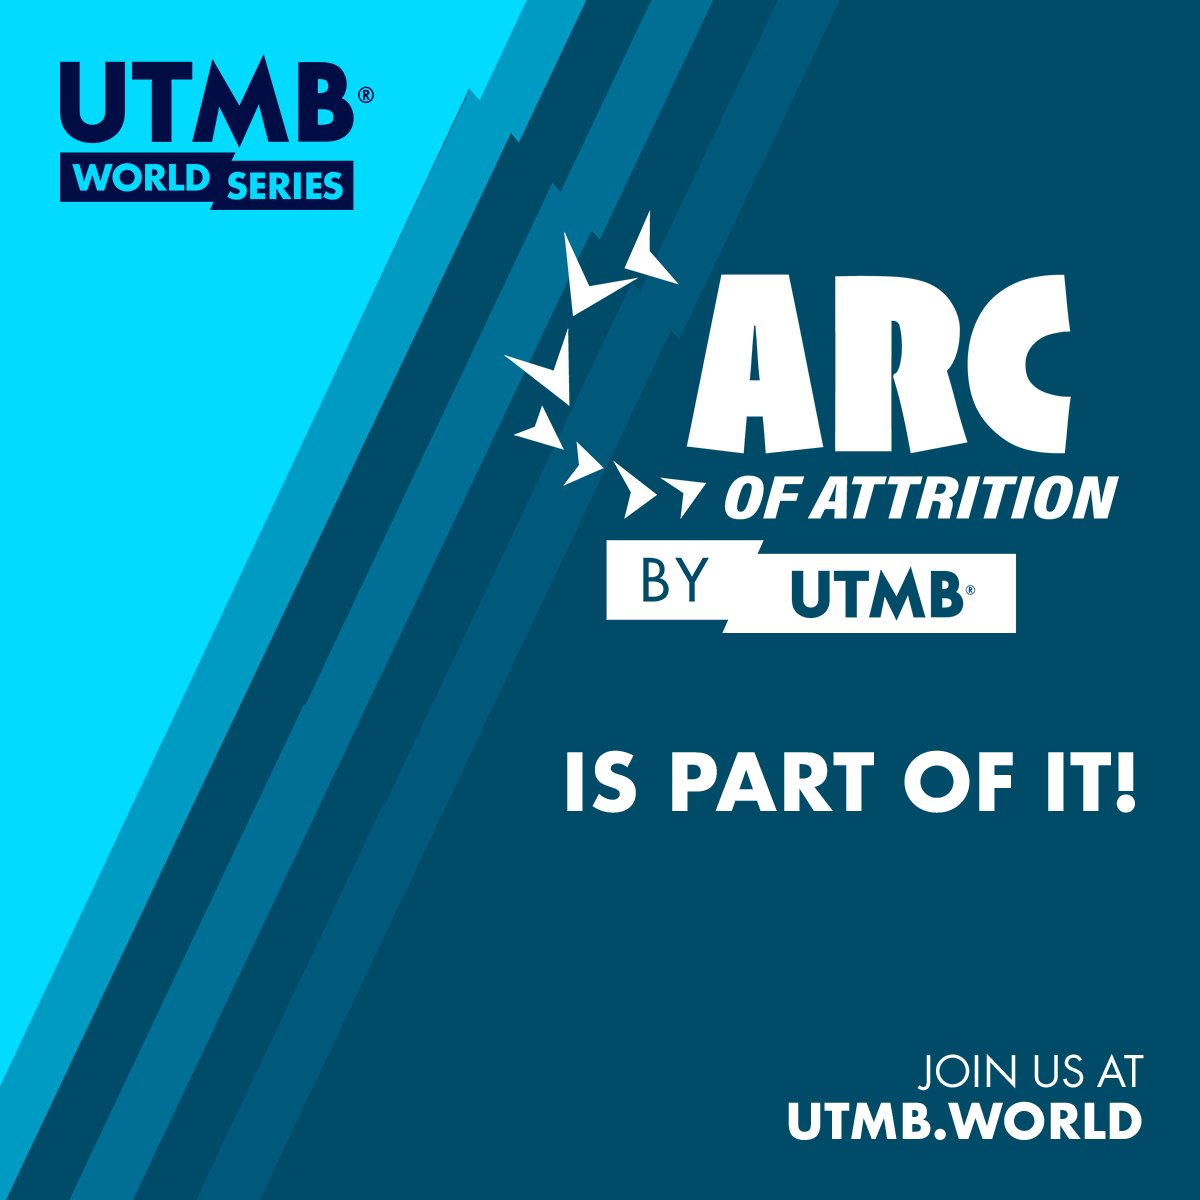 🇬🇧 The legendary Arc of Attrition in Cornwall, England joins the UTMB World Series! Remaining close to its Cornish roots and spirit, #ArcofAttritionbyUTMB will once again be set in the stunning landscapes of the South West England shoreline on the Cornwall Coast Path. #UTMBWorld